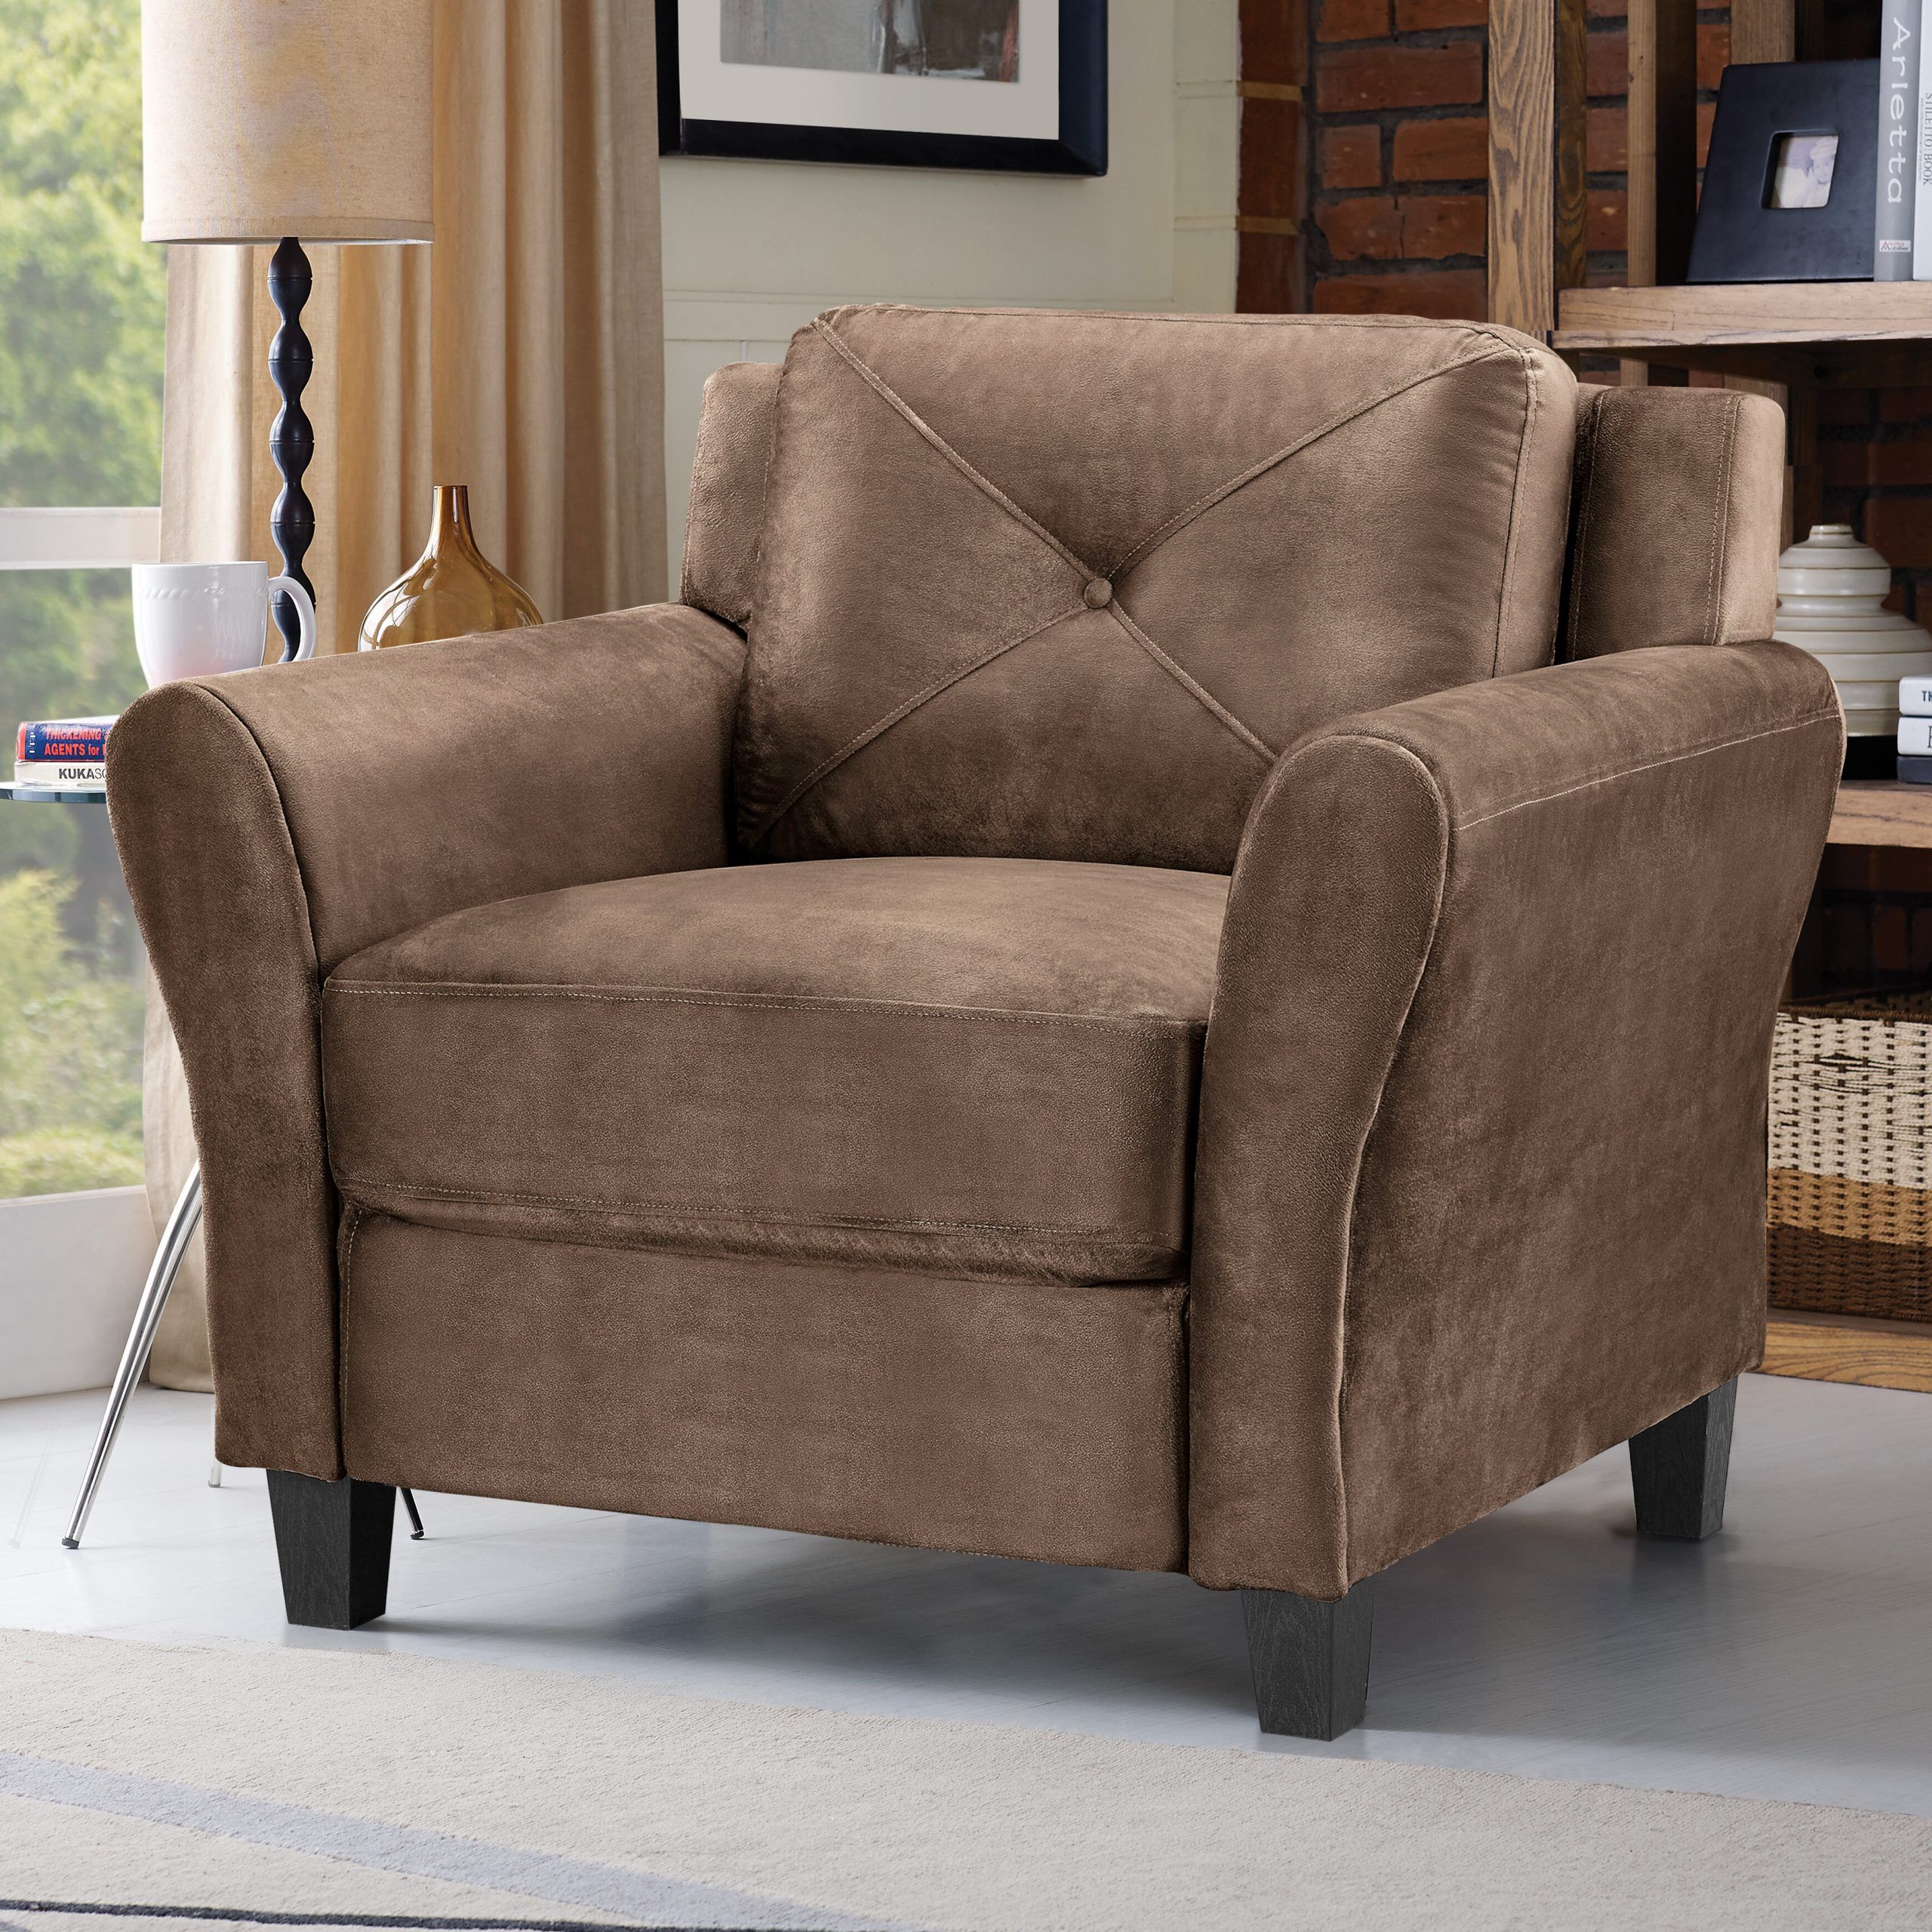 Round Arm Small Accent Chairs You'Ll Love In 2021 | Wayfair Intended For Ansar Faux Leather Barrel Chairs (View 7 of 15)